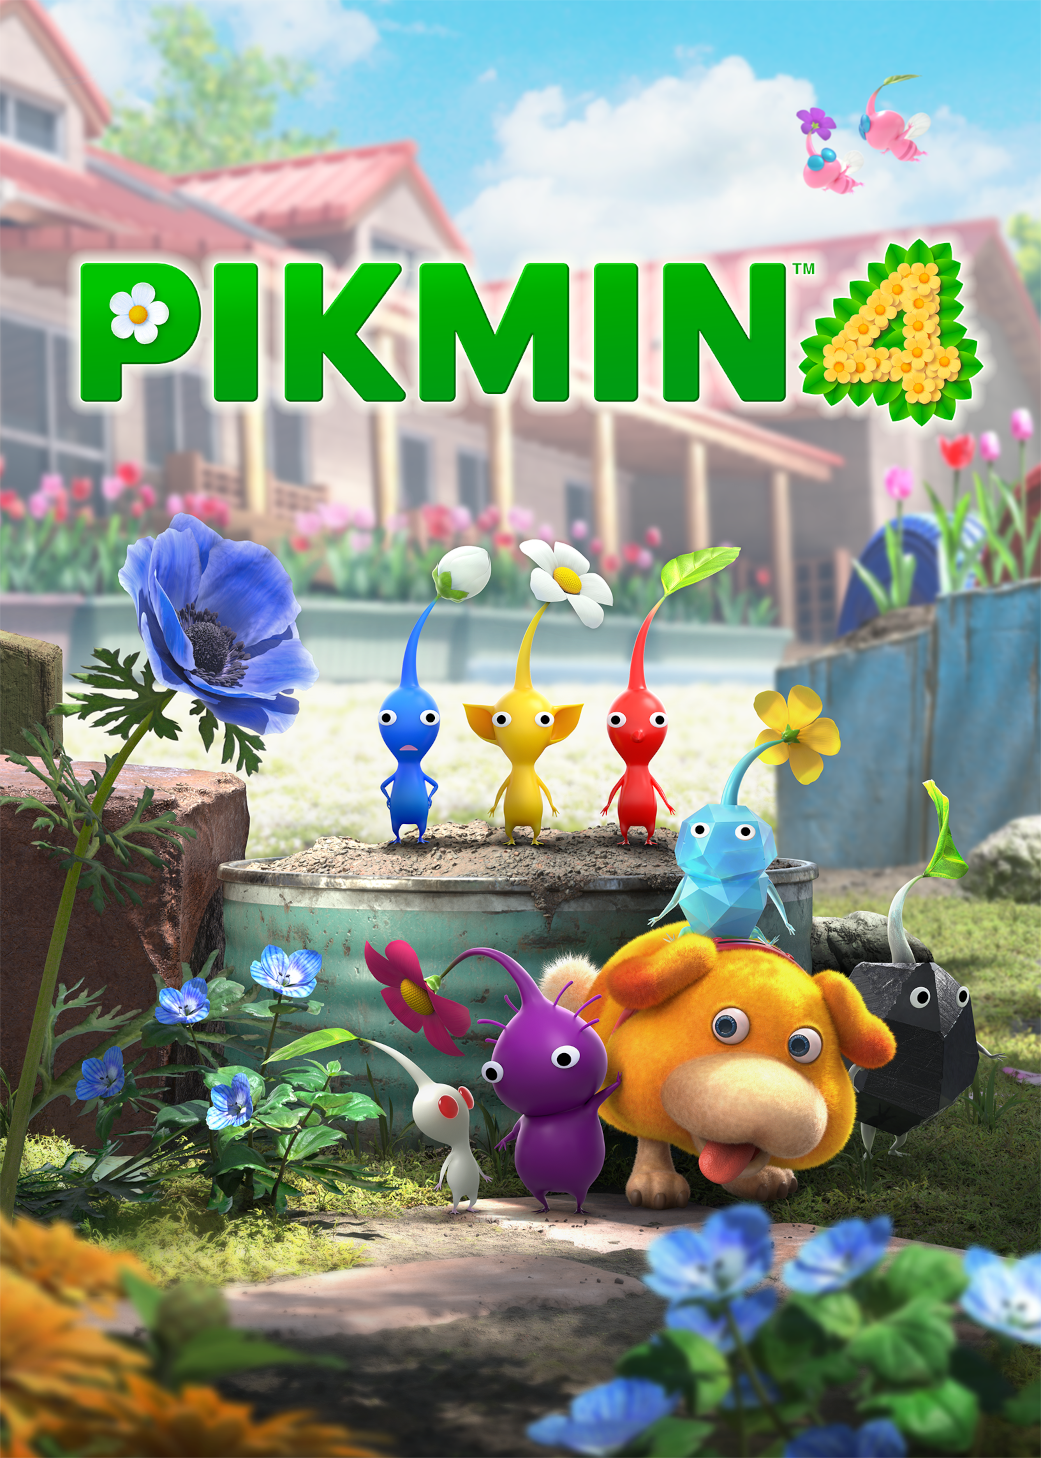 Pikmin 4's cover